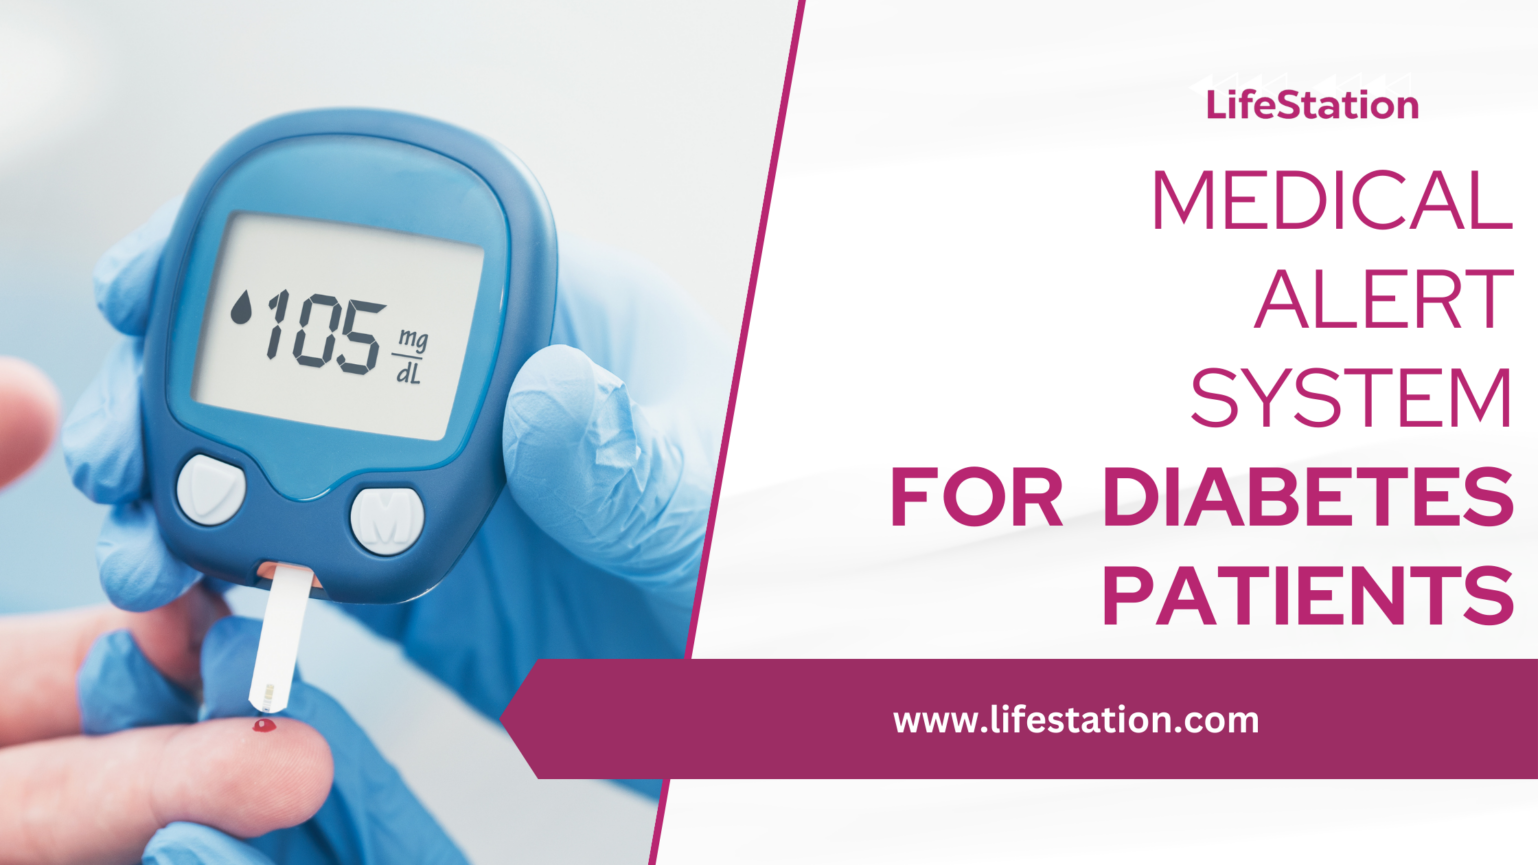 A promotional graphic for LifeStation's Medical Alert System, featuring an image of a person wearing blue medical gloves, holding a glucometer displaying a blood glucose level of 105 mg/dL. The right side of the image presents bold text that reads "Medical Alert System for Diabetes Patients"